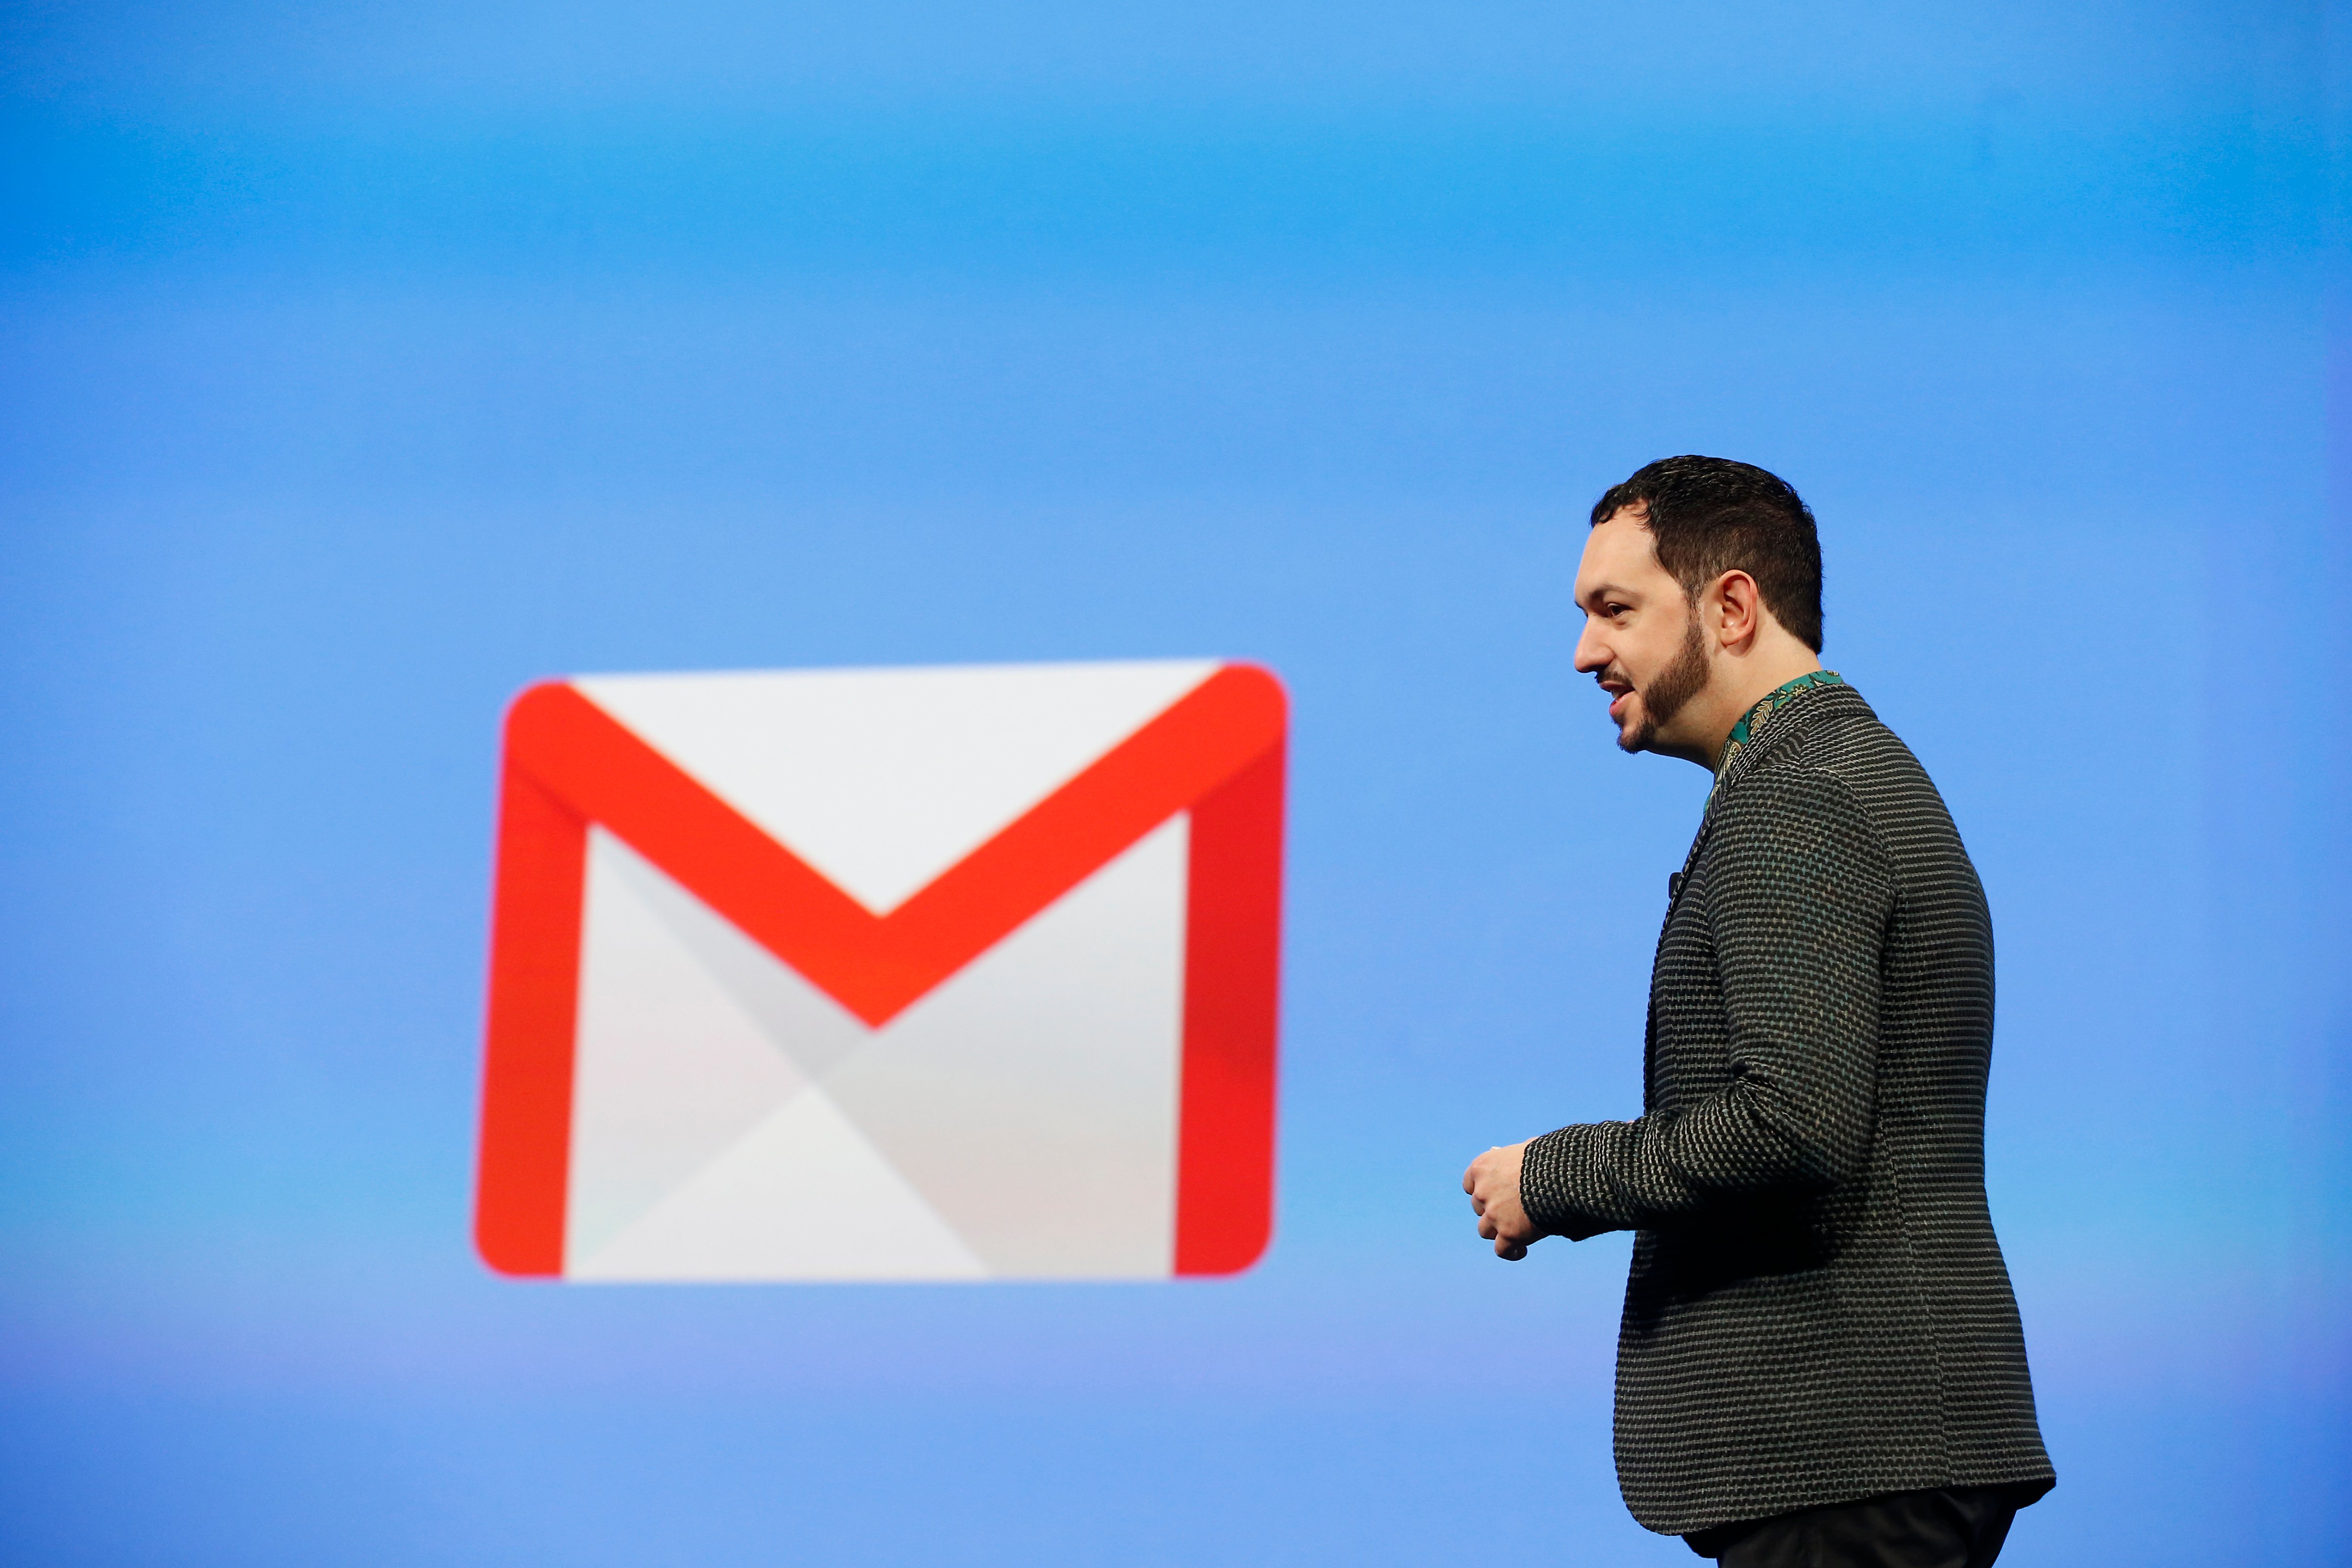 Matias Durante, Vice President, Design at Google, speaks on stage during the Google I/O Developers Conference at Moscone Center on June 25, 2014 in San Francisco, California. (Stephen Lam—Getty Images)